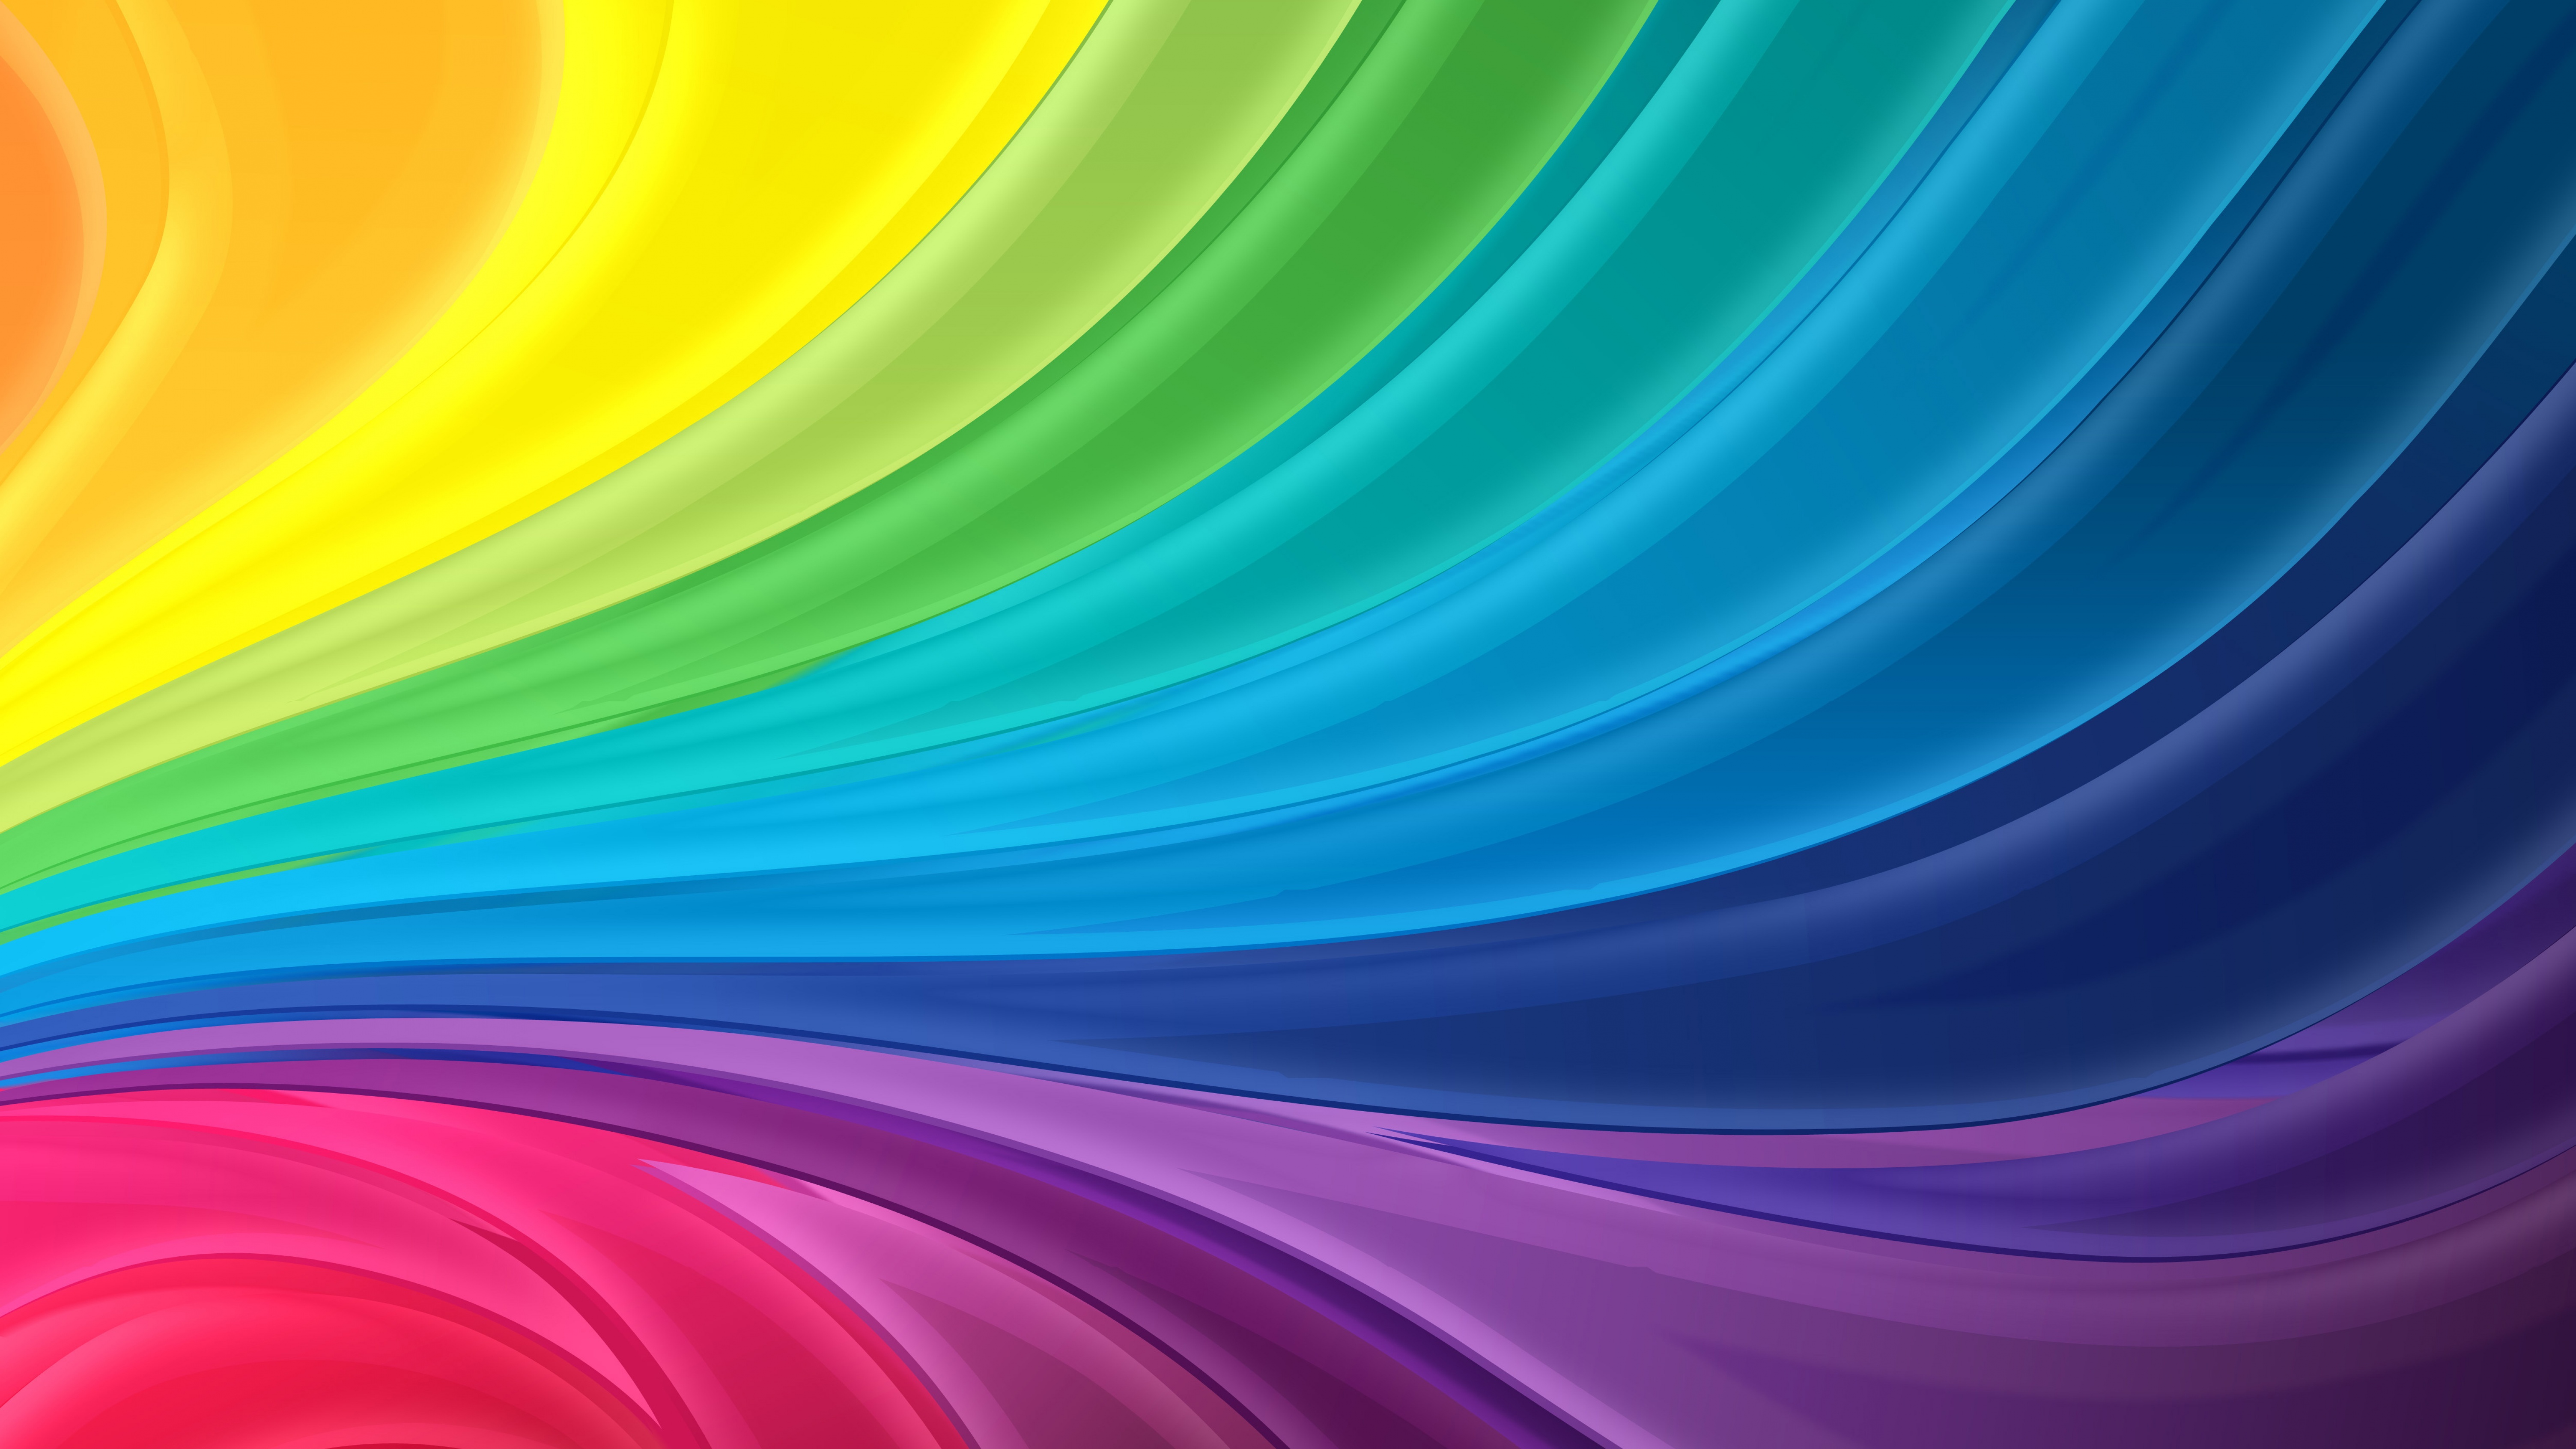 Wallpaper  1920x1200 px abstract multicolor 1920x1200  wallpaperUp   1493395  HD Wallpapers  WallHere